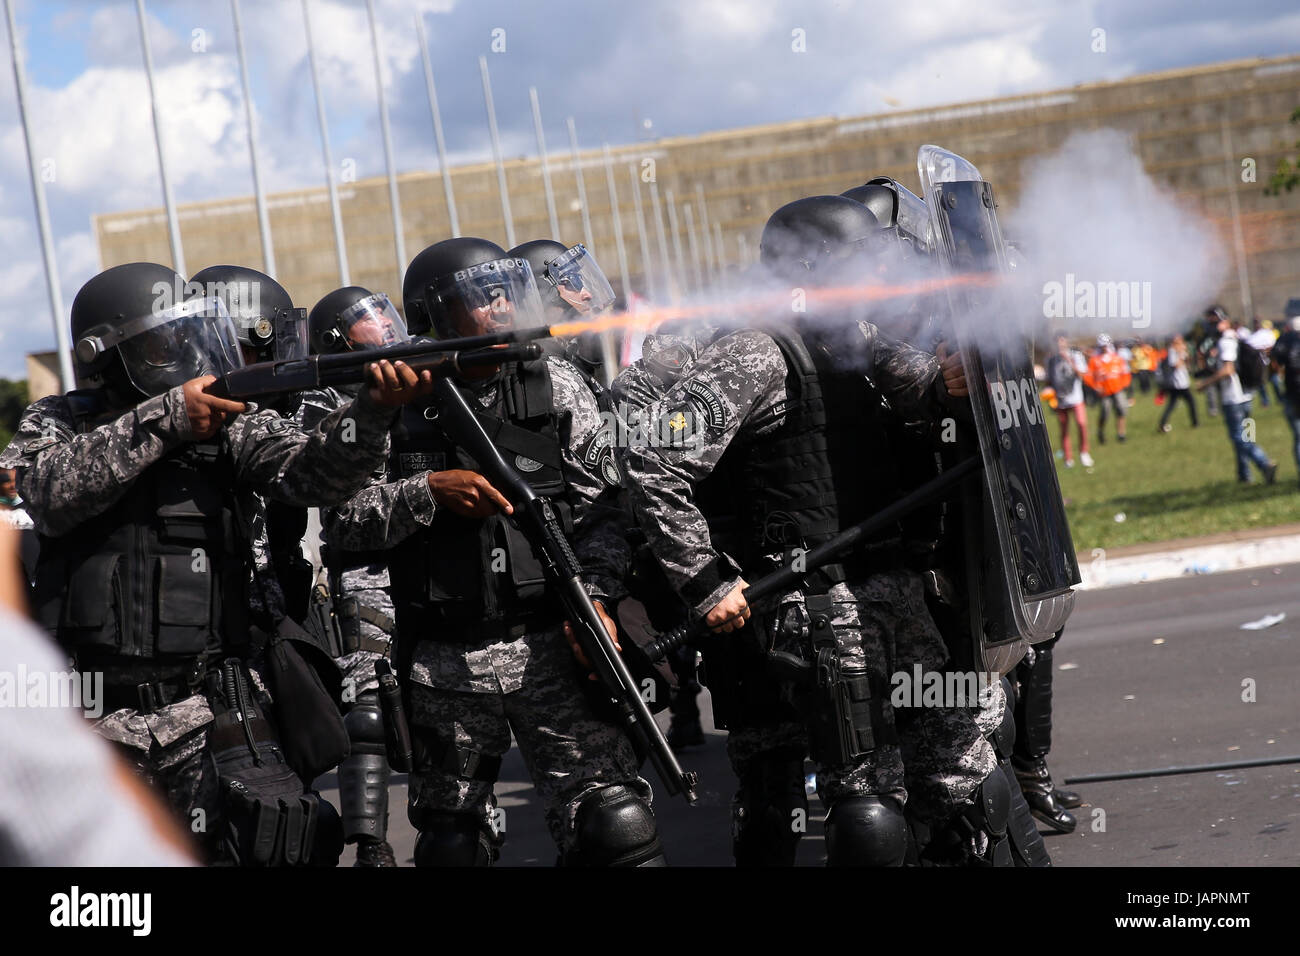 Military policeman fire rubber bullets at anti-government rioters attacking the government center during protests demanding the resignation of President Michel Temer May 24, 2017 in Brasilia, Brazil.   (photo by Marcelo Camargo/Agency Brasil via Planetpix) Stock Photo